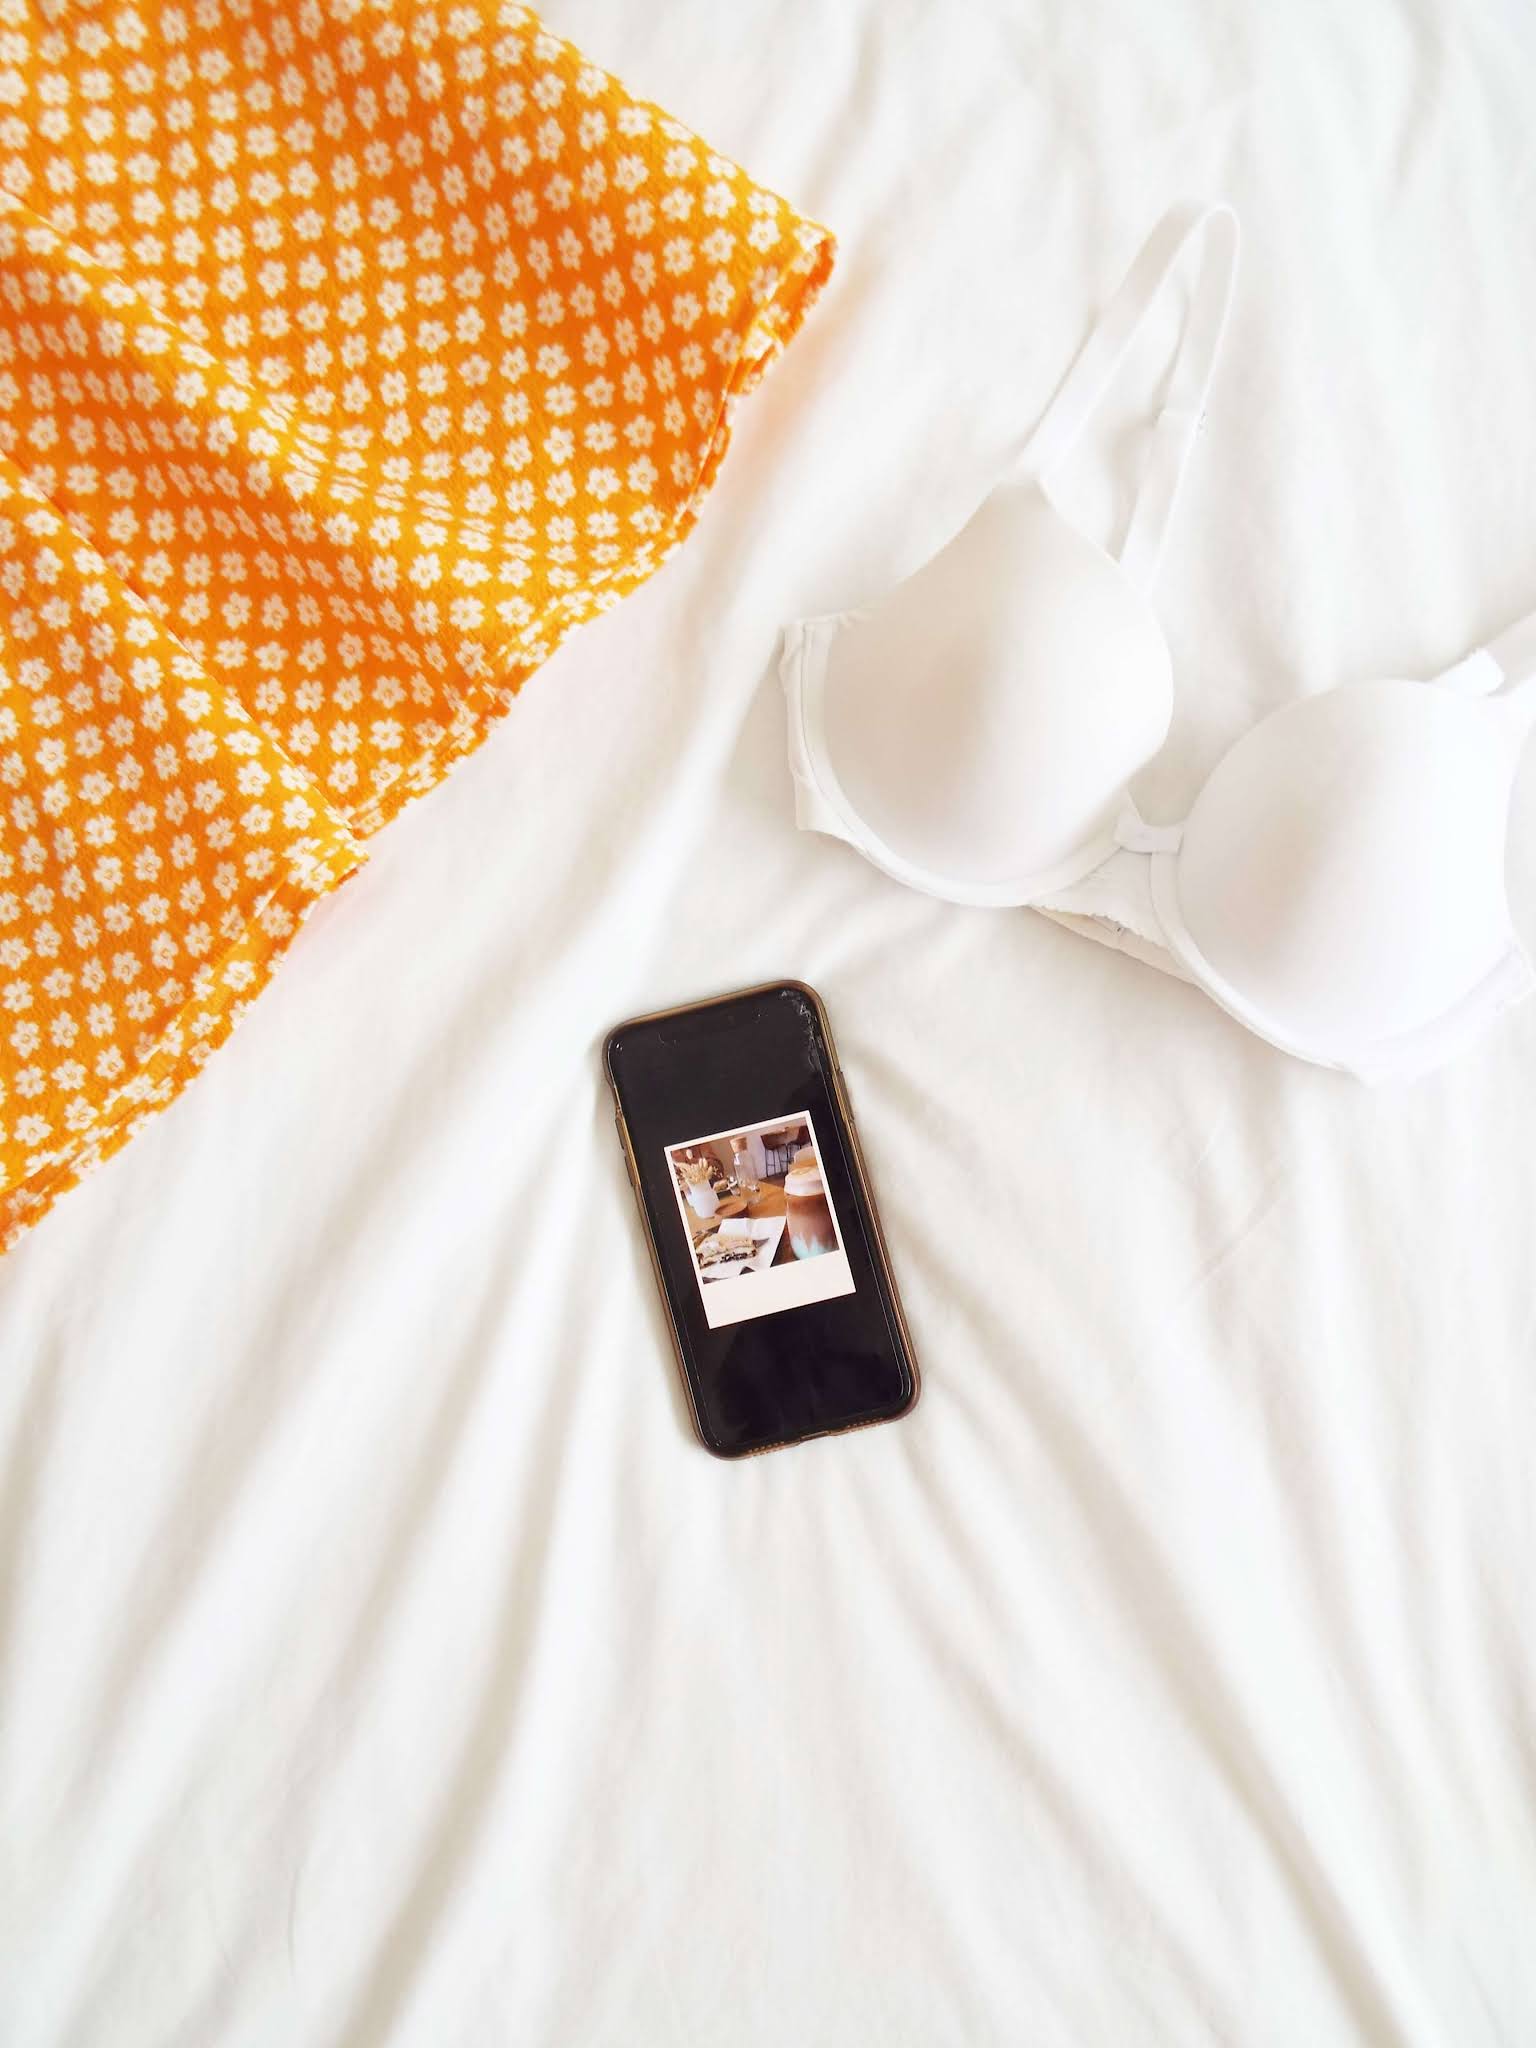 Orange floral dress, white bra and phone with little polaroid picture displayed on it, with cookie pie and an iced latte, lay on white bedding.